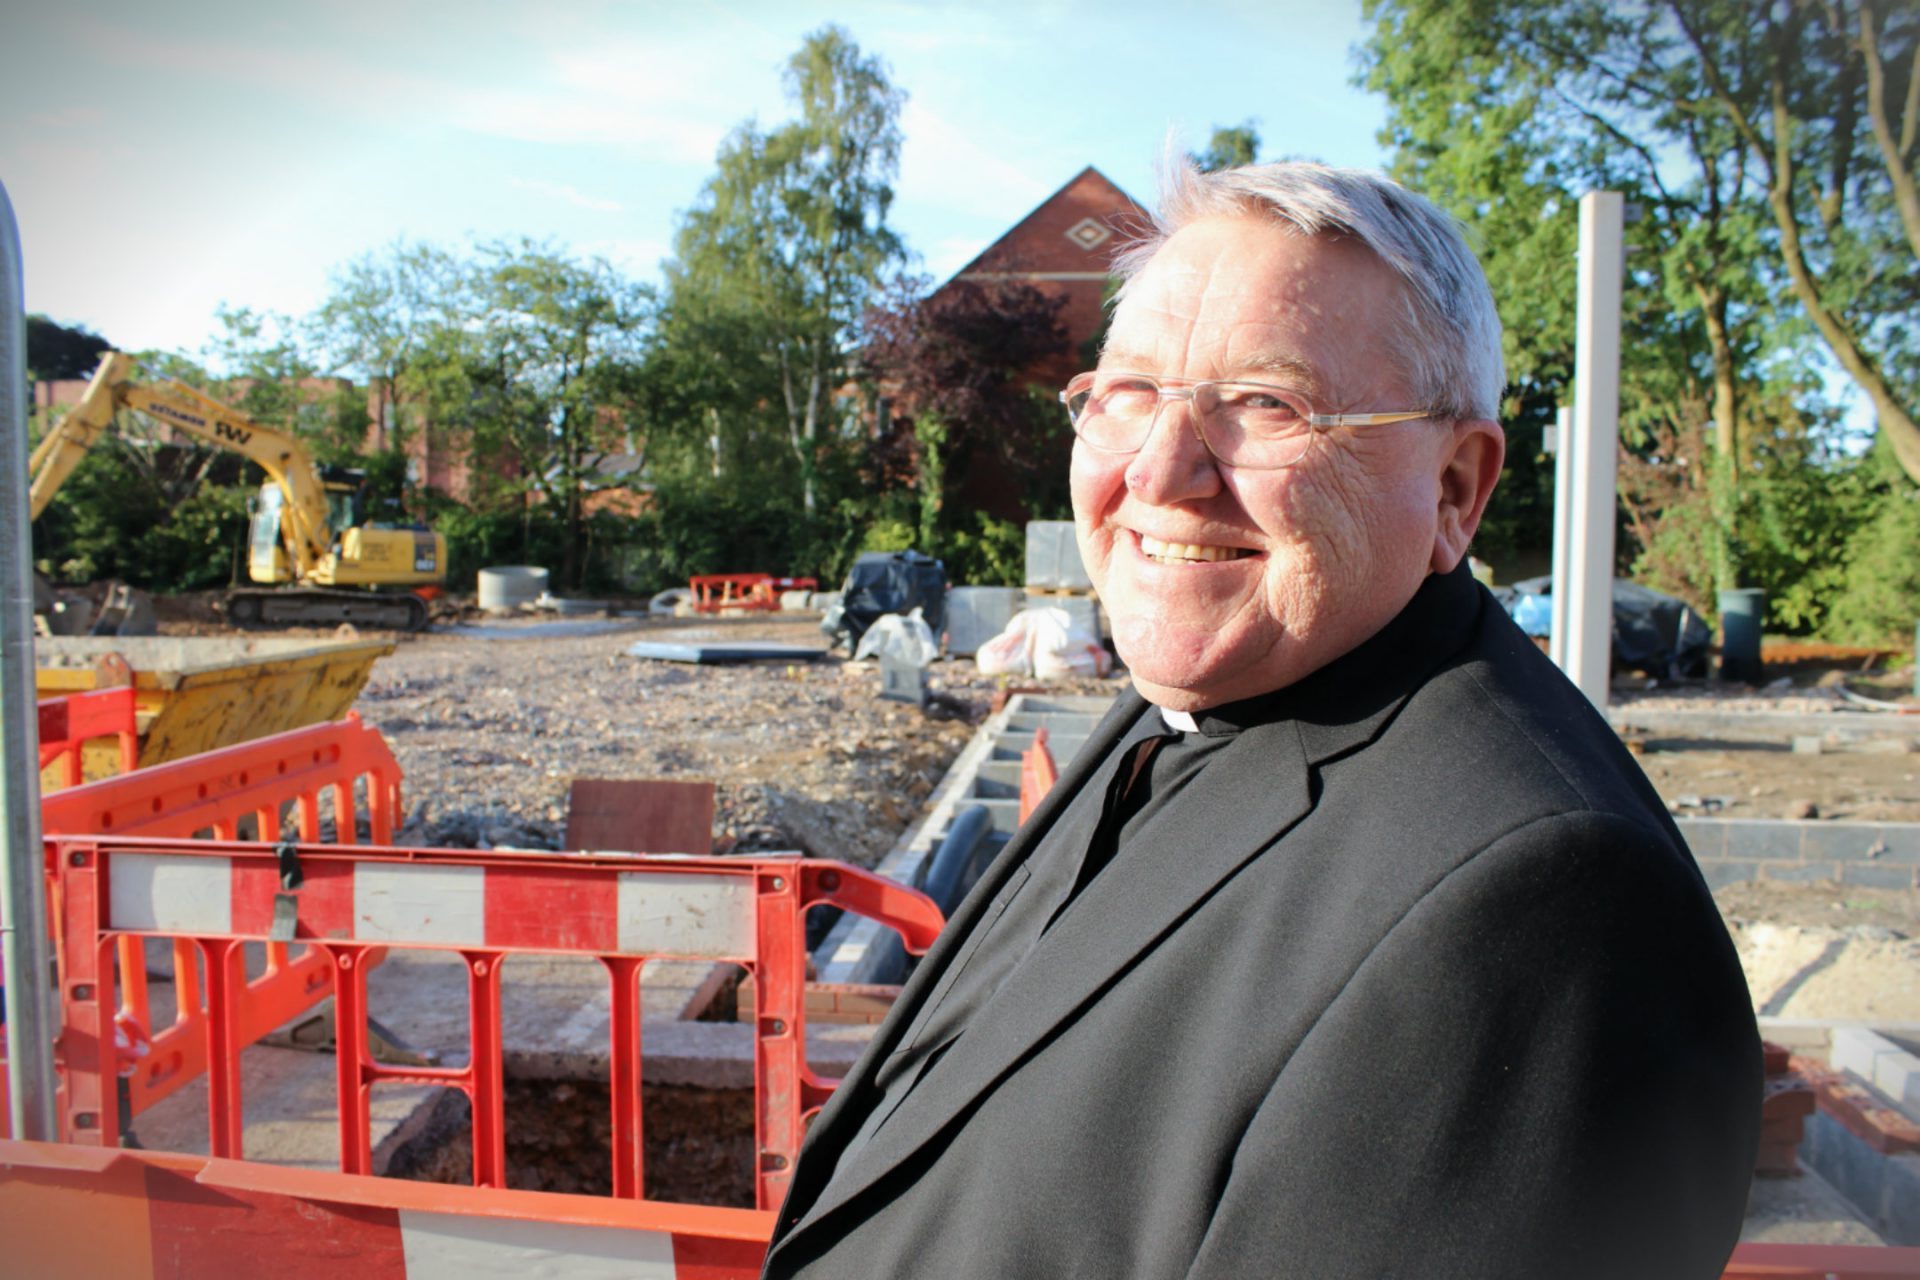 Father Thomas Mulheran at the site blessing service 2012